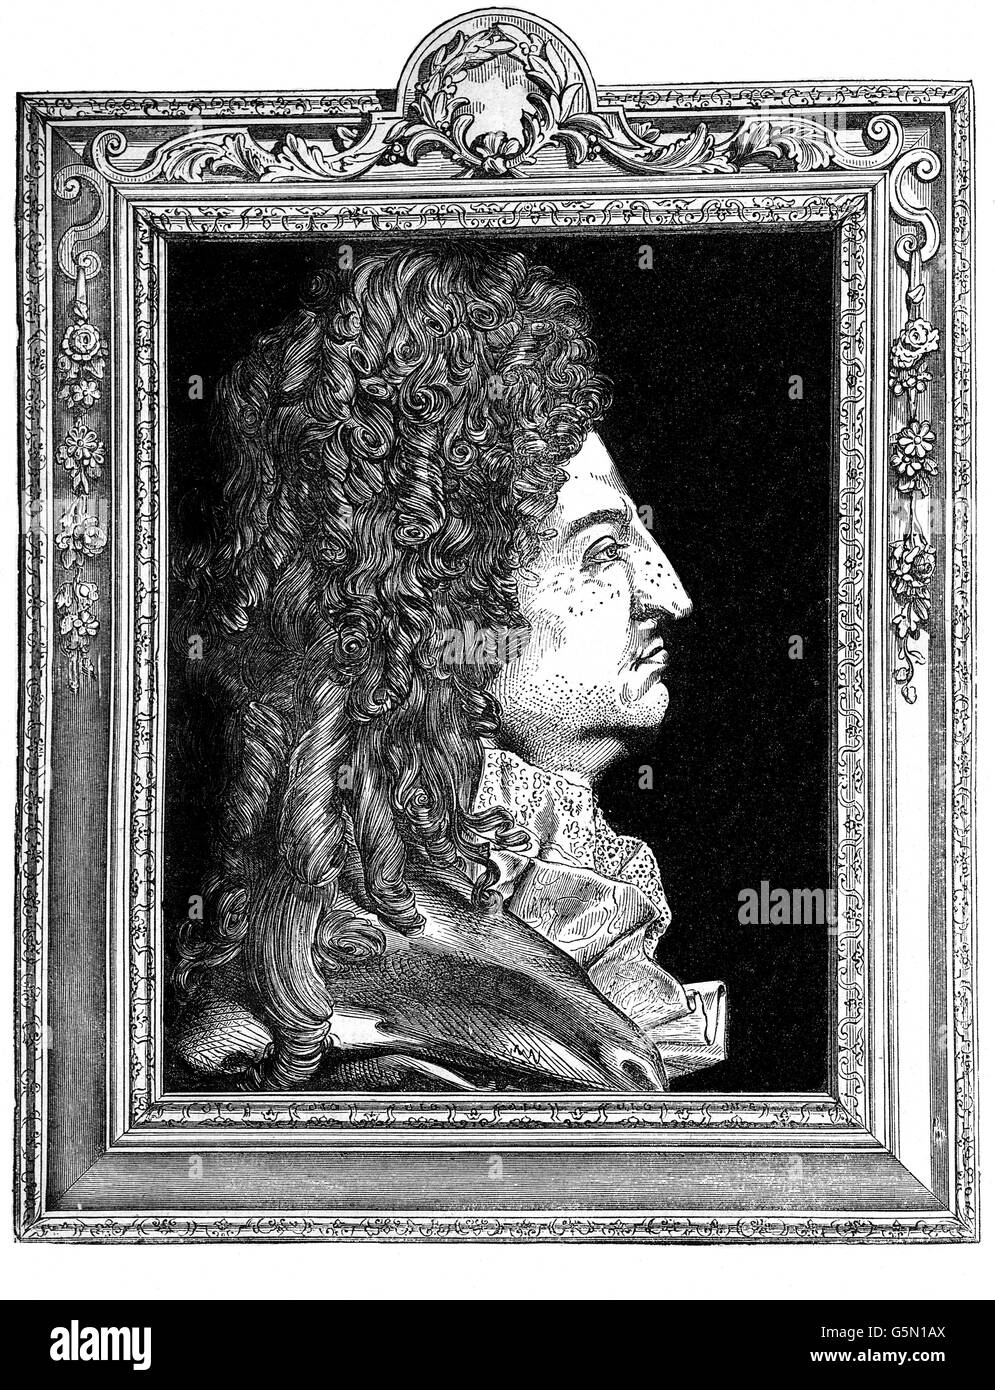 Louis XIV (1638 – 1715), known as Louis the Great (Louis le Grand) or the Sun King (le Roi-Soleil), was a monarch of the House of Bourbon who ruled as King of France from 1643 until his death in 1715. Stock Photo